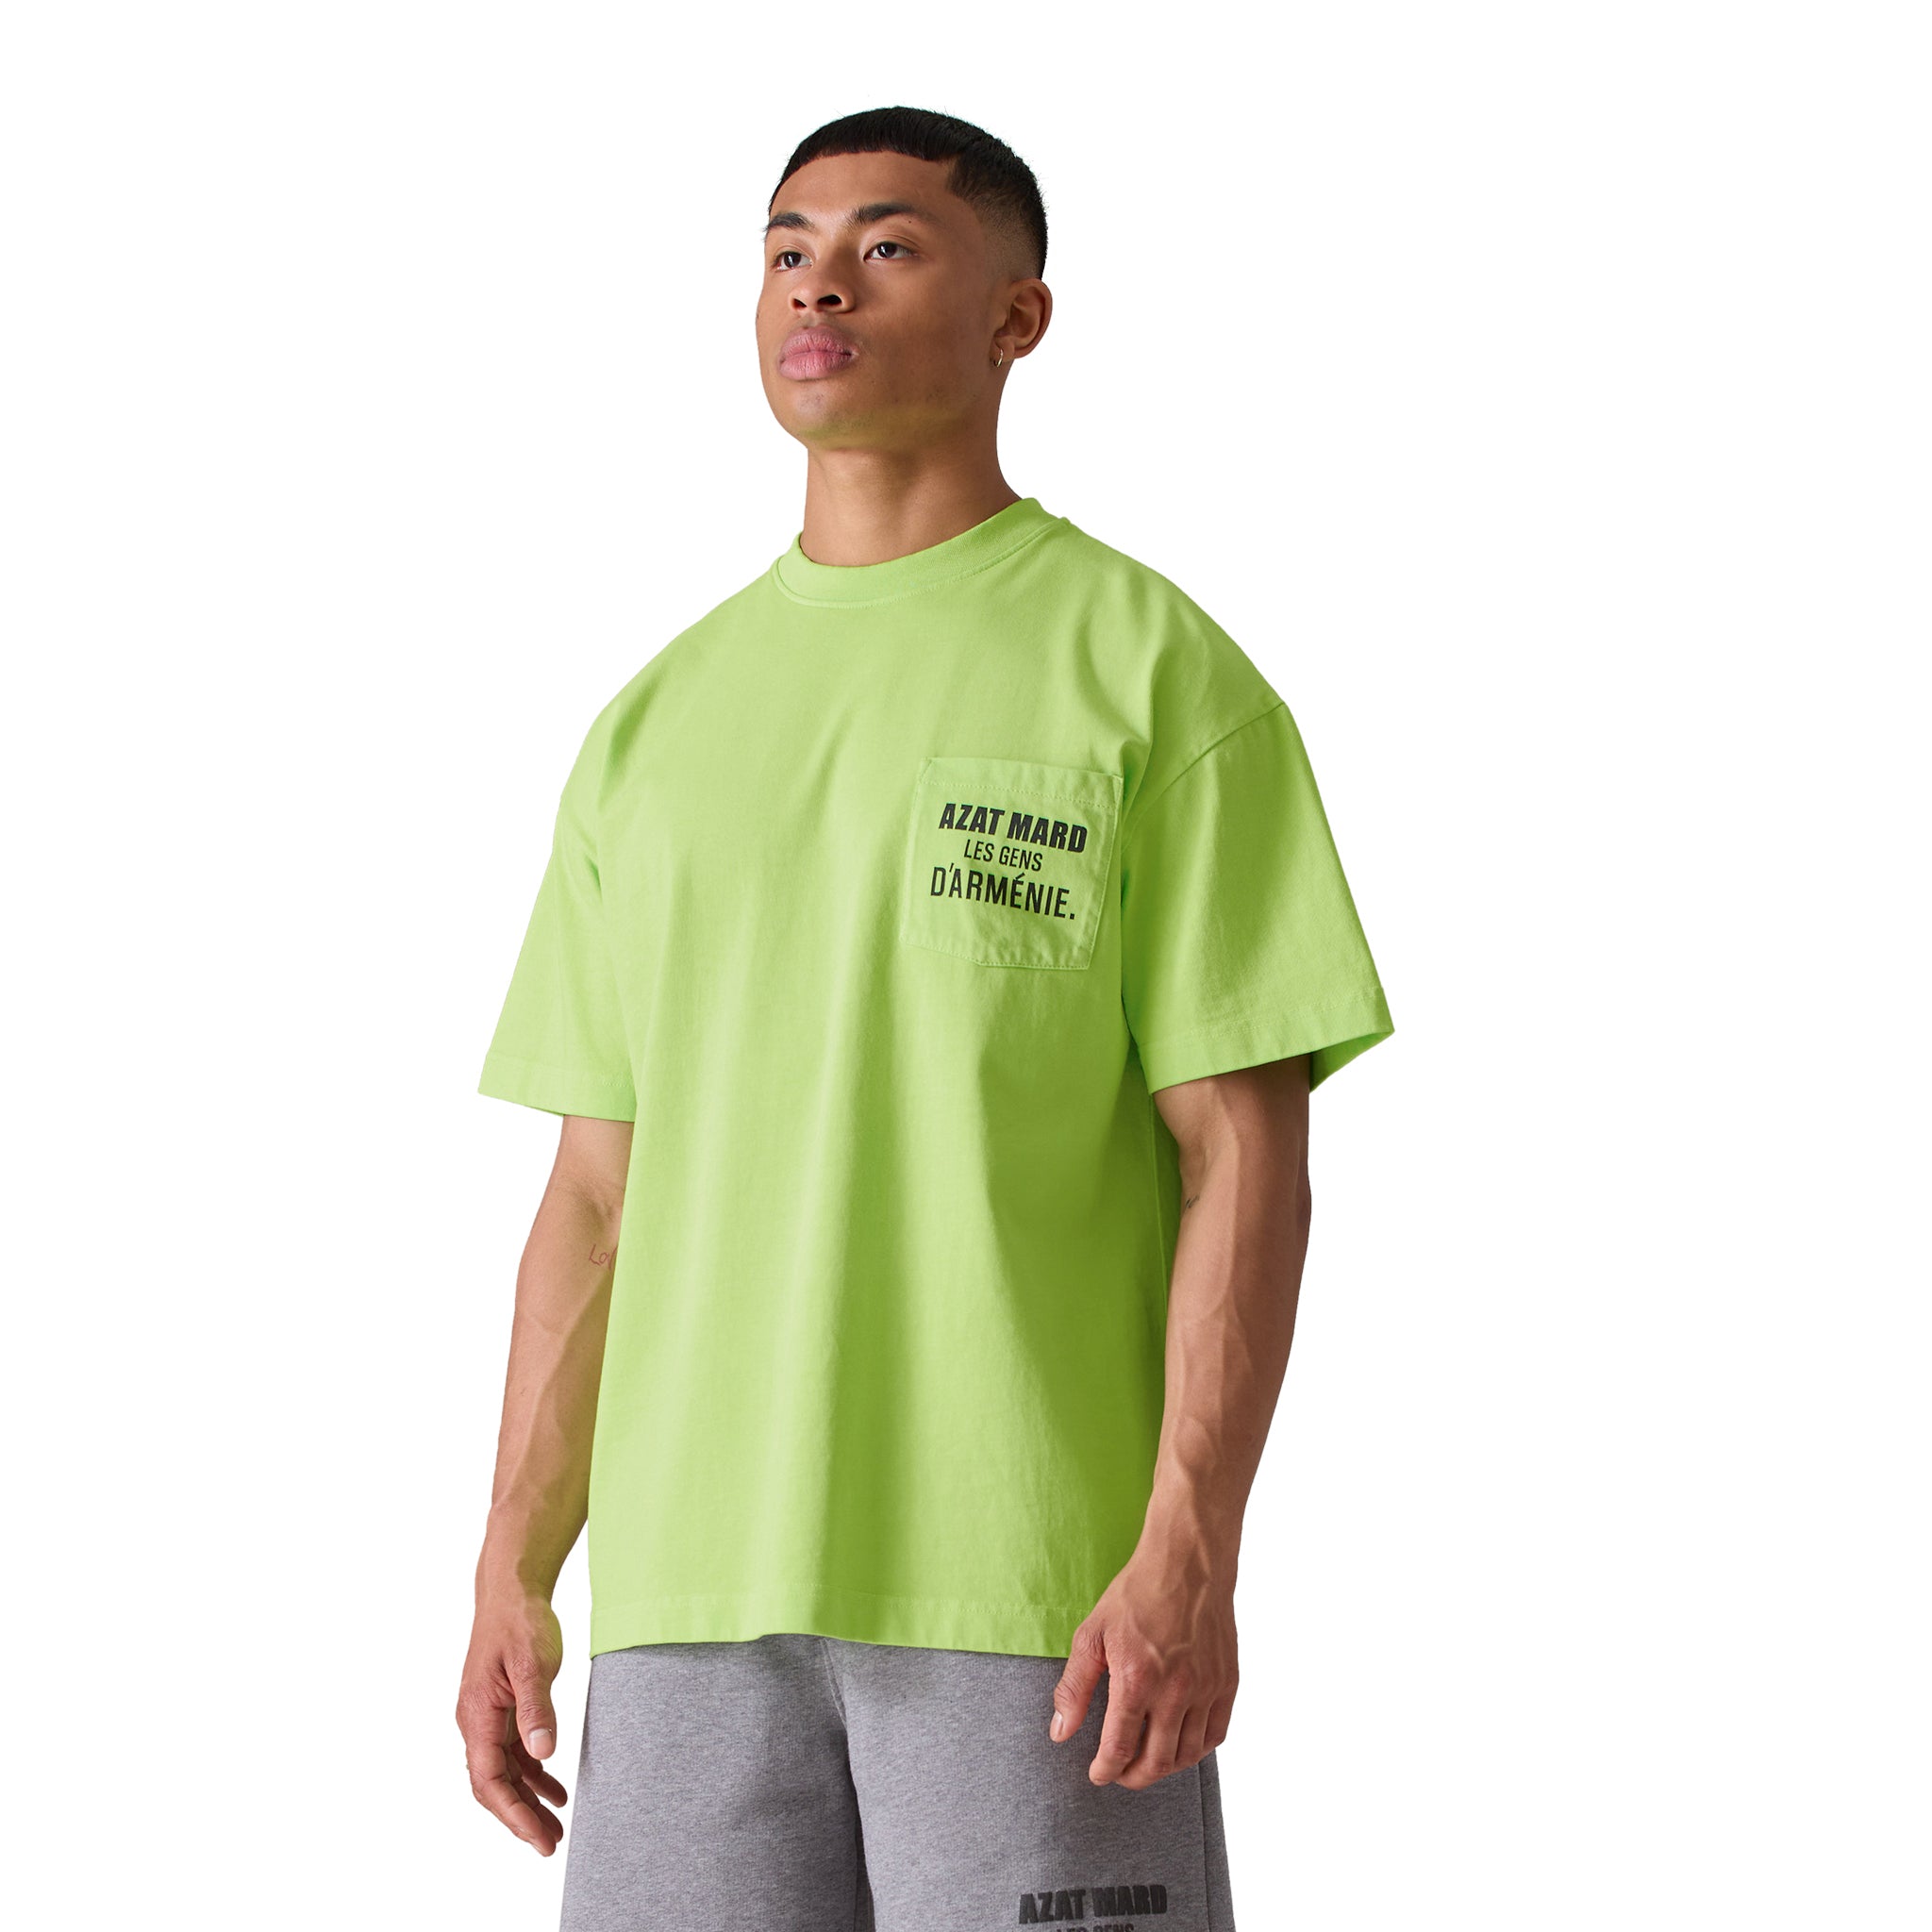 Model front view of Azat Mard Les Gens T Shirt Lime Green SS23090